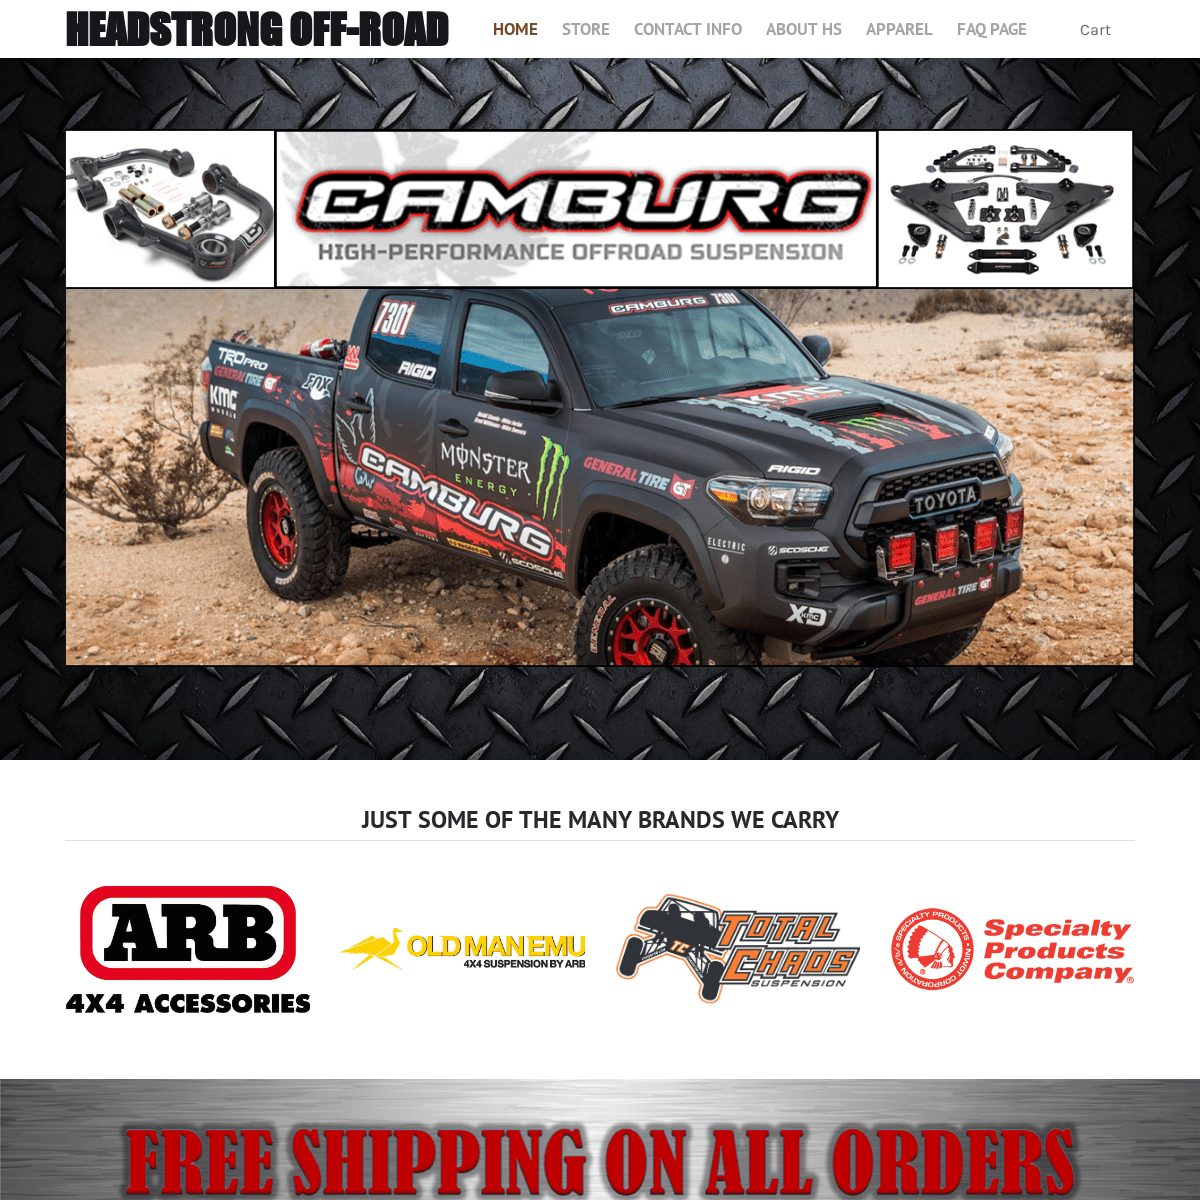 HEADSTRONG OFF-ROAD - Low prices and great customer service